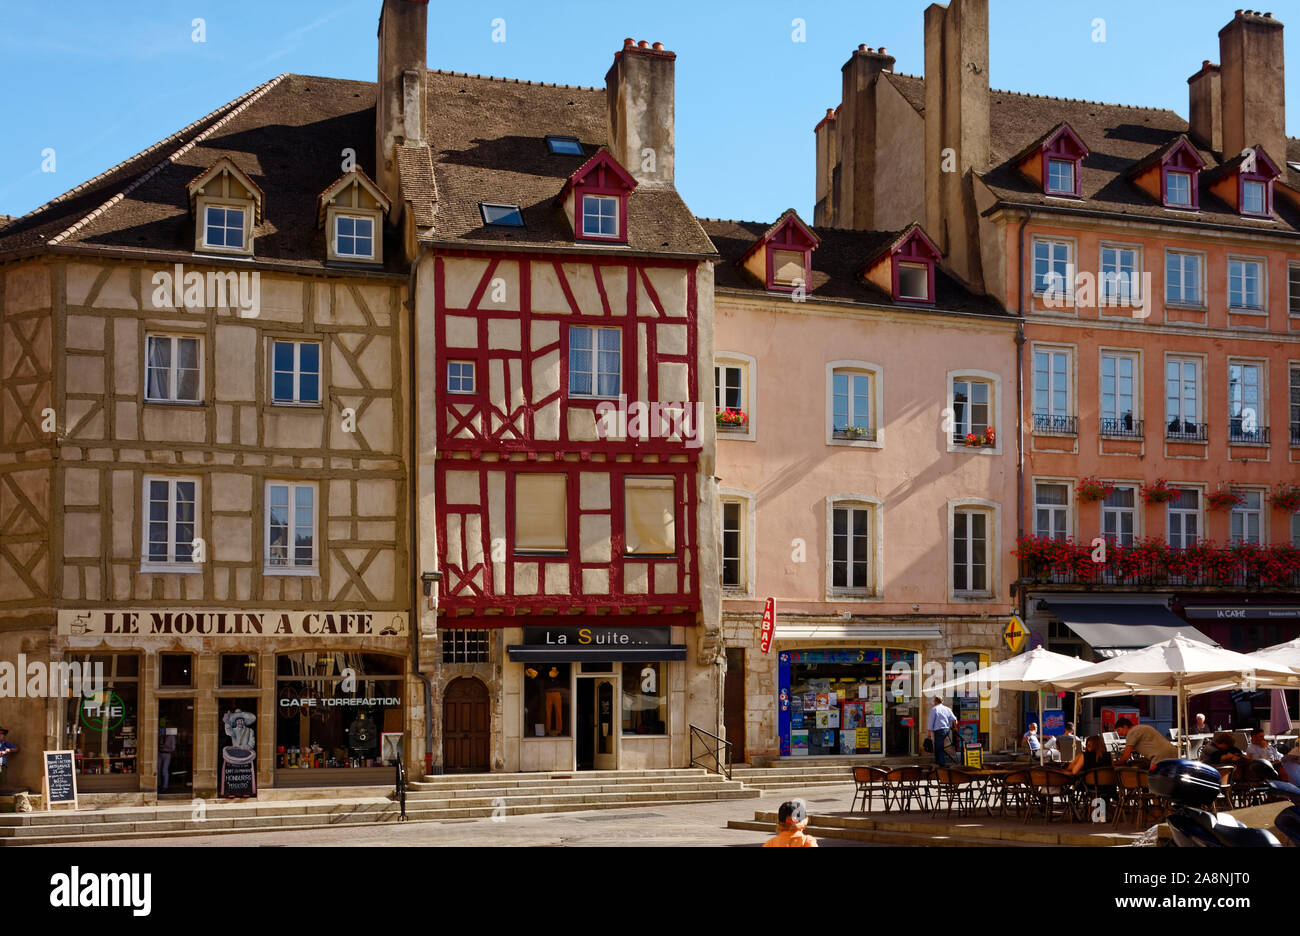 cityscape, old half-timbered buildings, outdoor tables, chairs, umbrellas, people, shops, cafe, sloped street, Burgundy; Chalon sur Soane; France; sum Stock Photo